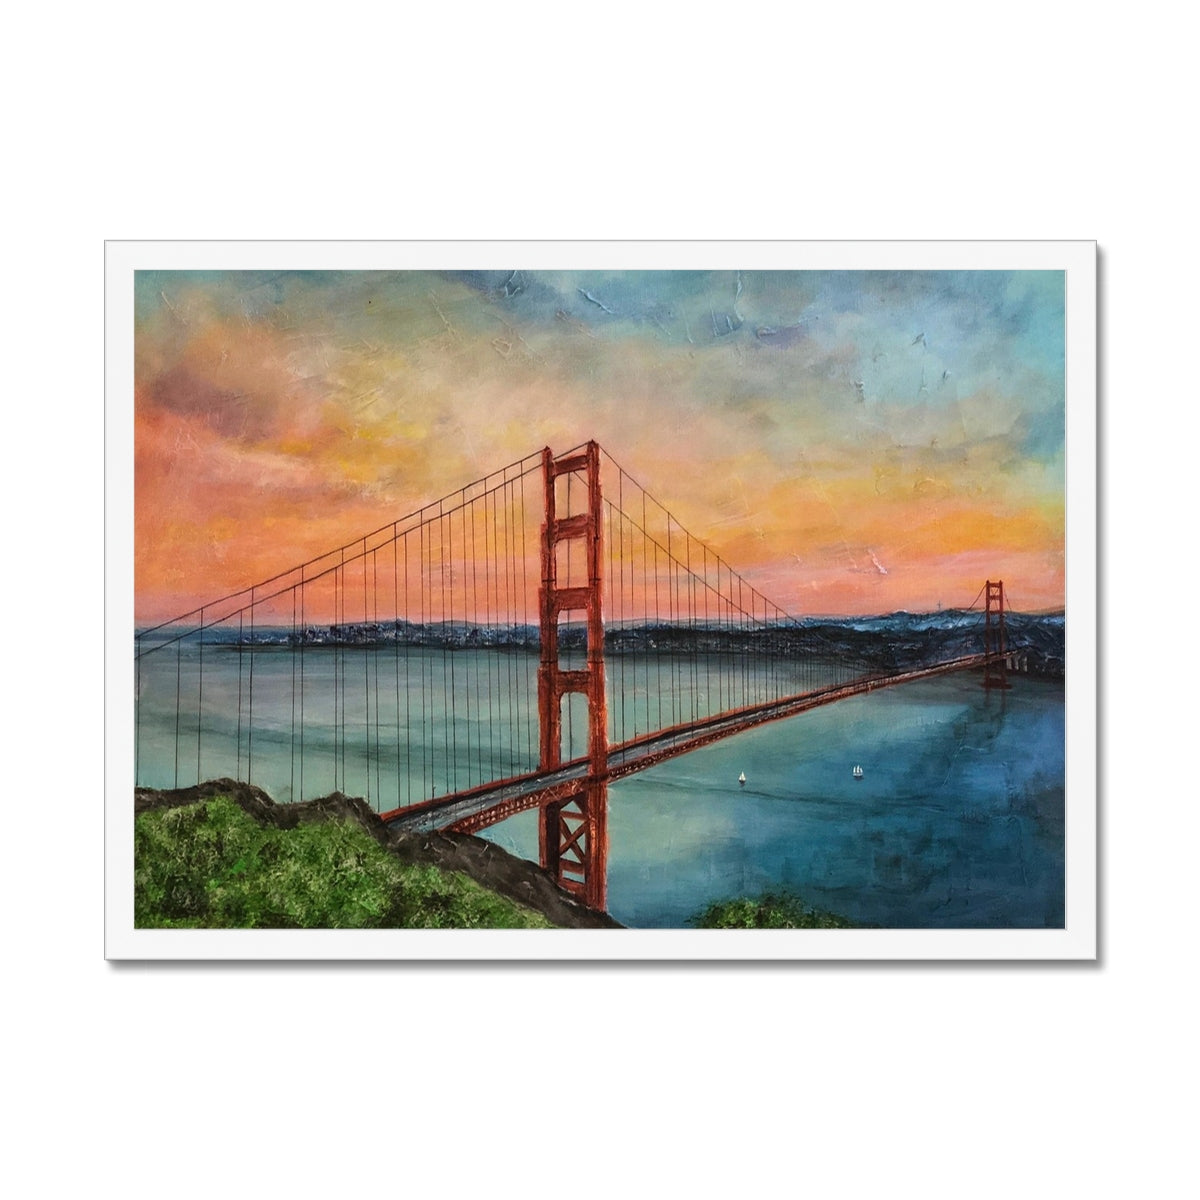 The Golden Gate Bridge Painting | Framed Prints From Scotland-Framed Prints-World Art Gallery-A2 Landscape-White Frame-Paintings, Prints, Homeware, Art Gifts From Scotland By Scottish Artist Kevin Hunter